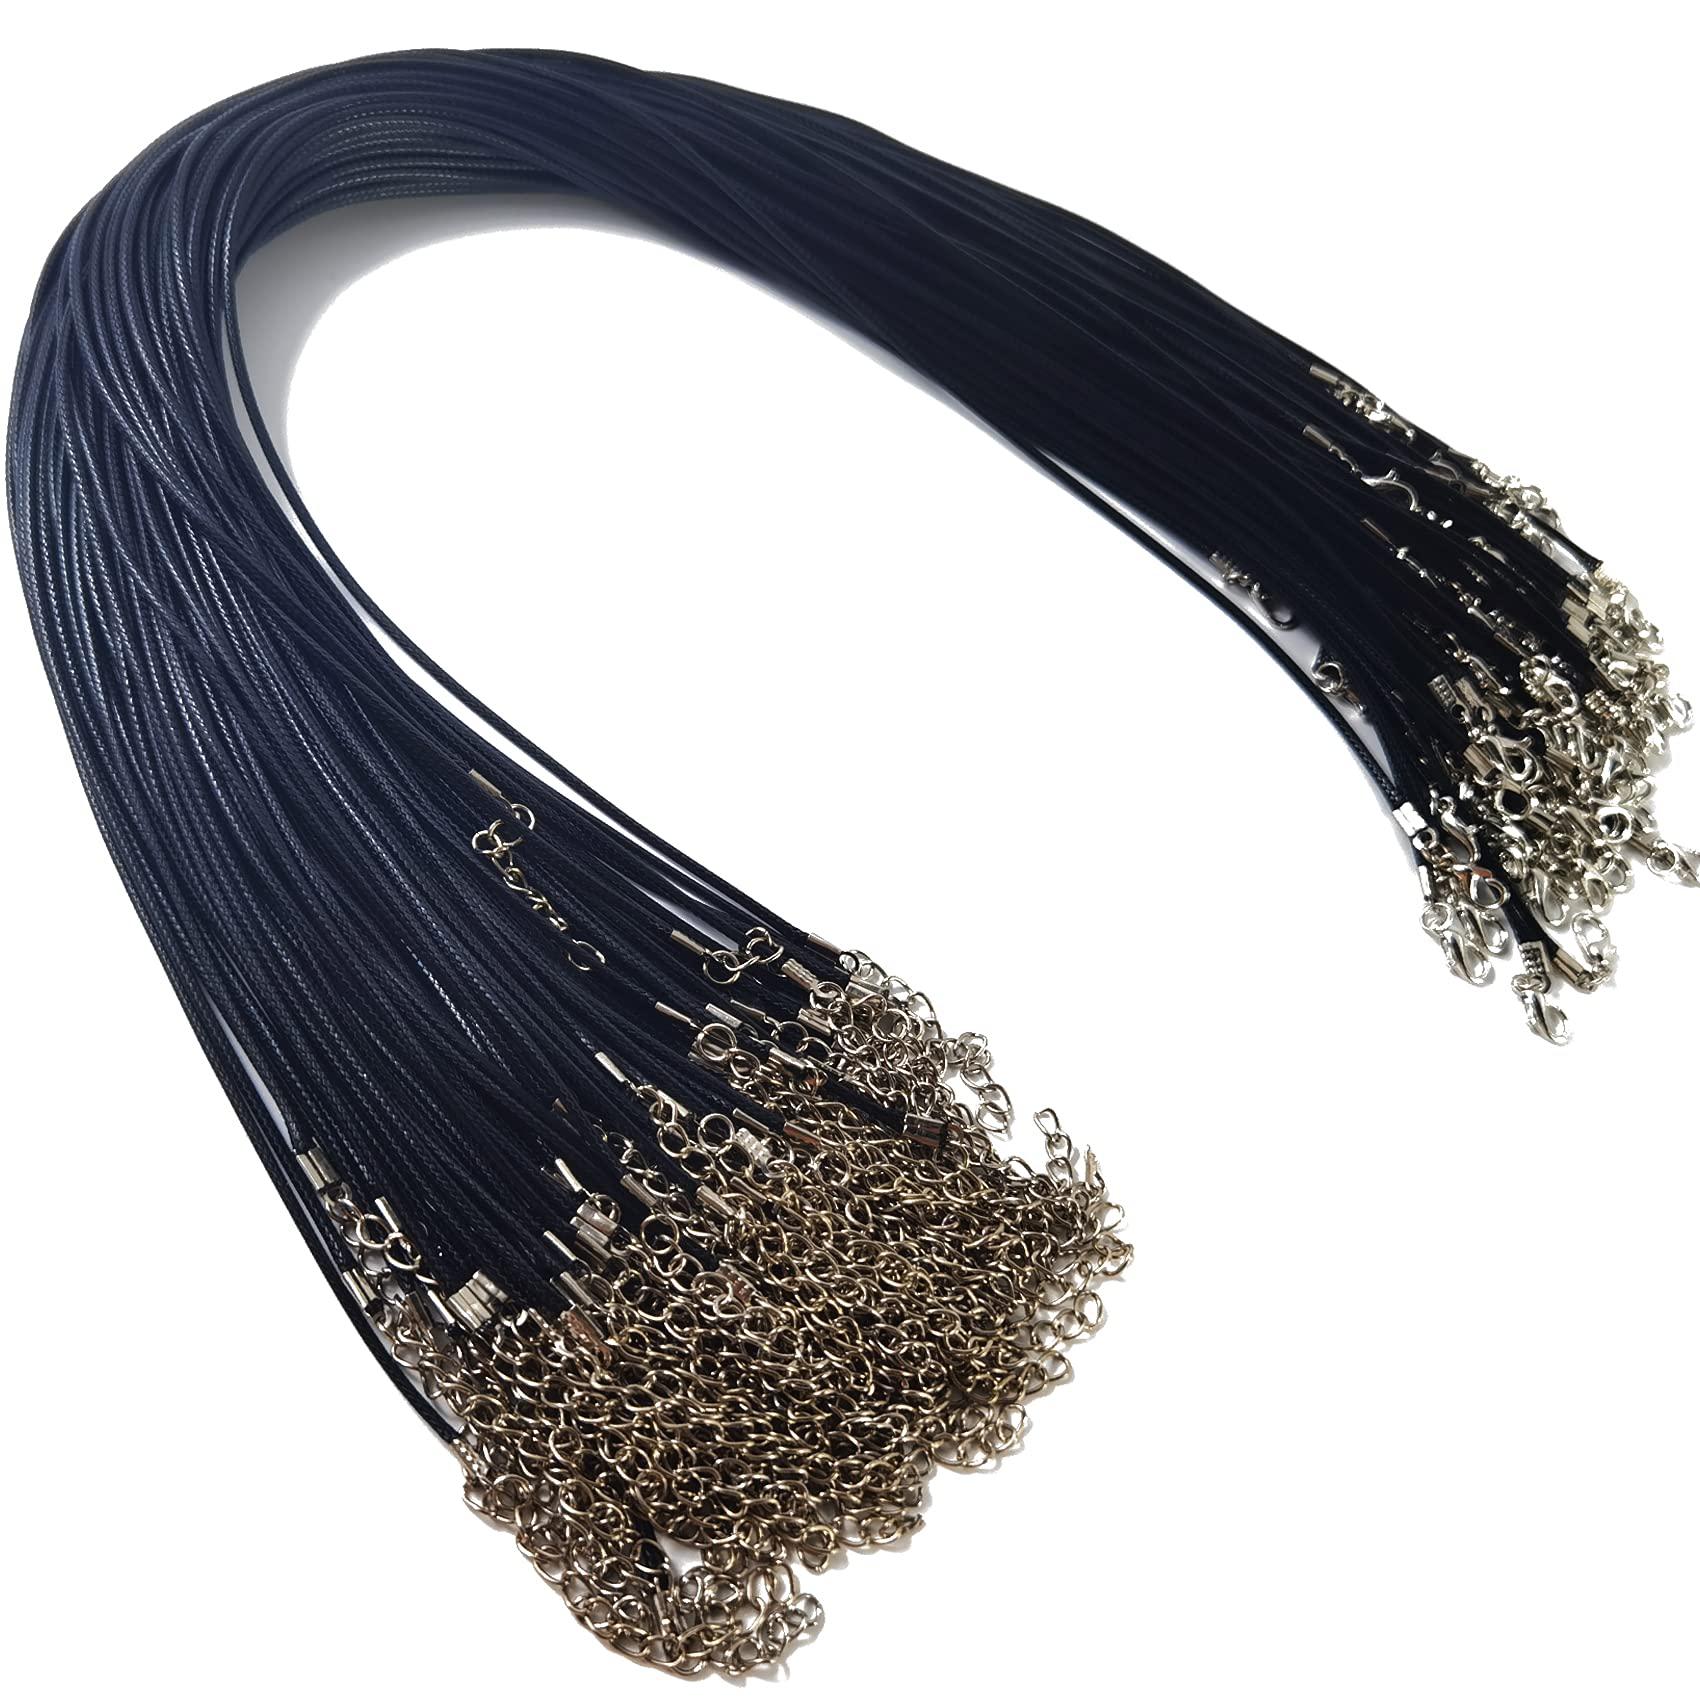 Ronyoung 100pcs Necklace Cord for Jewelry Making, Black Waxed Necklace Cord String for Jewelry Necklace Bracelet Making Supplies